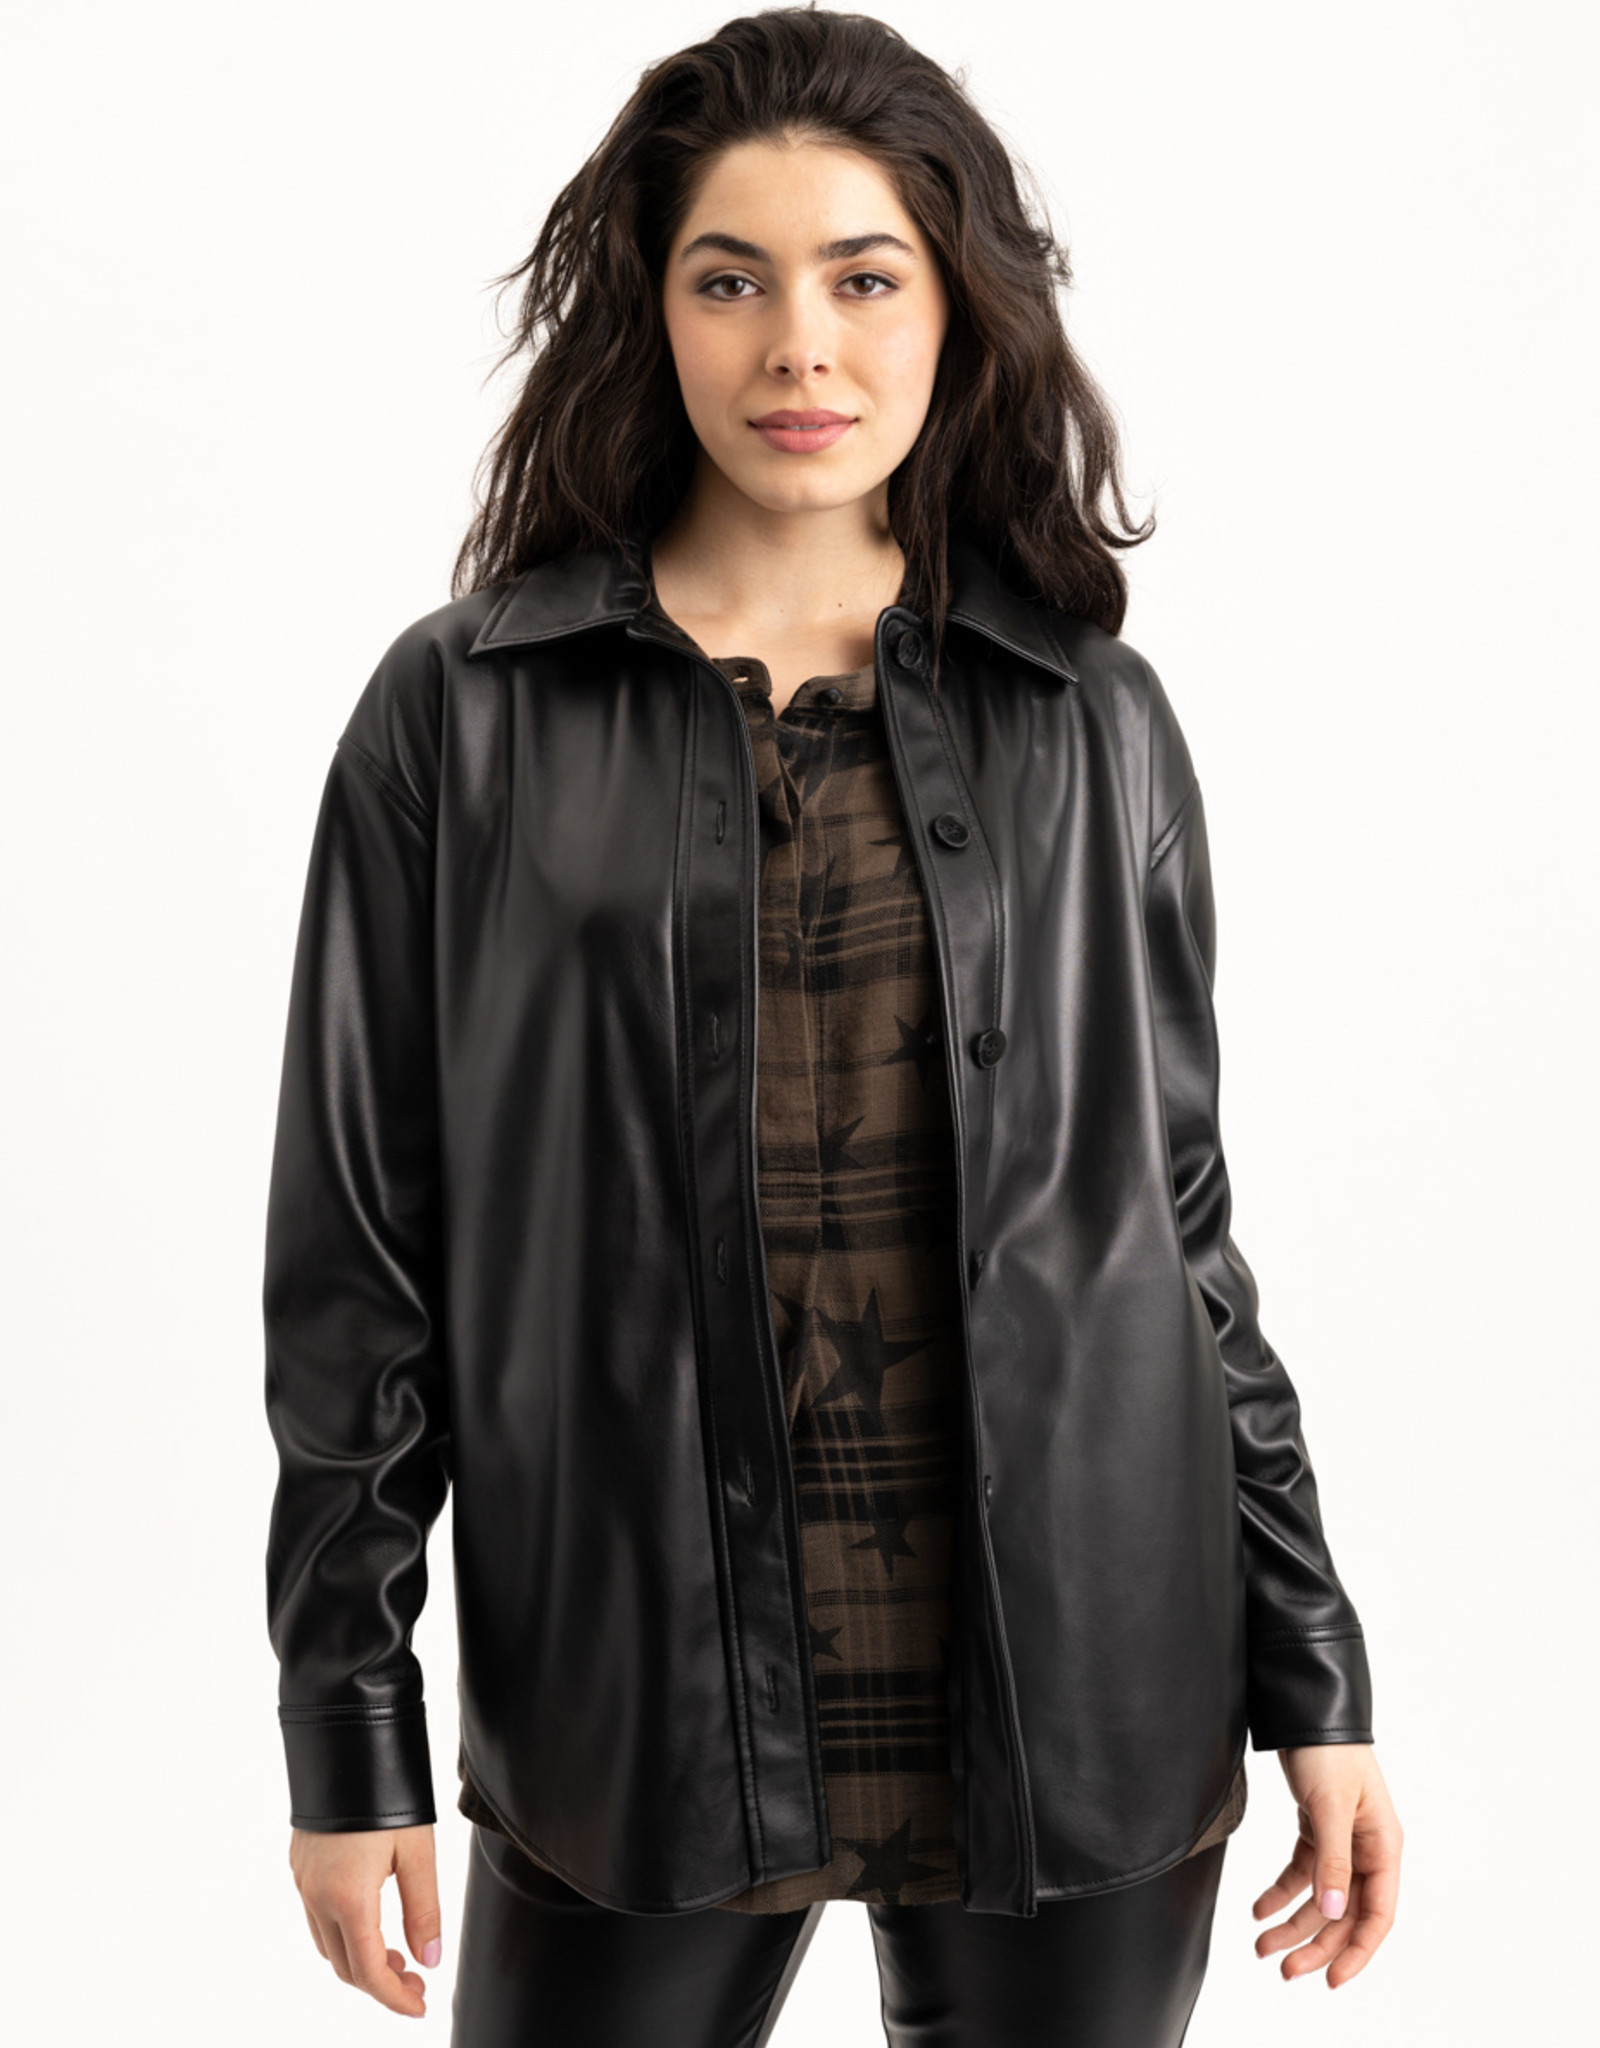 Renuar Button up Leather Jacket R5006 - Main Street Clothing Company